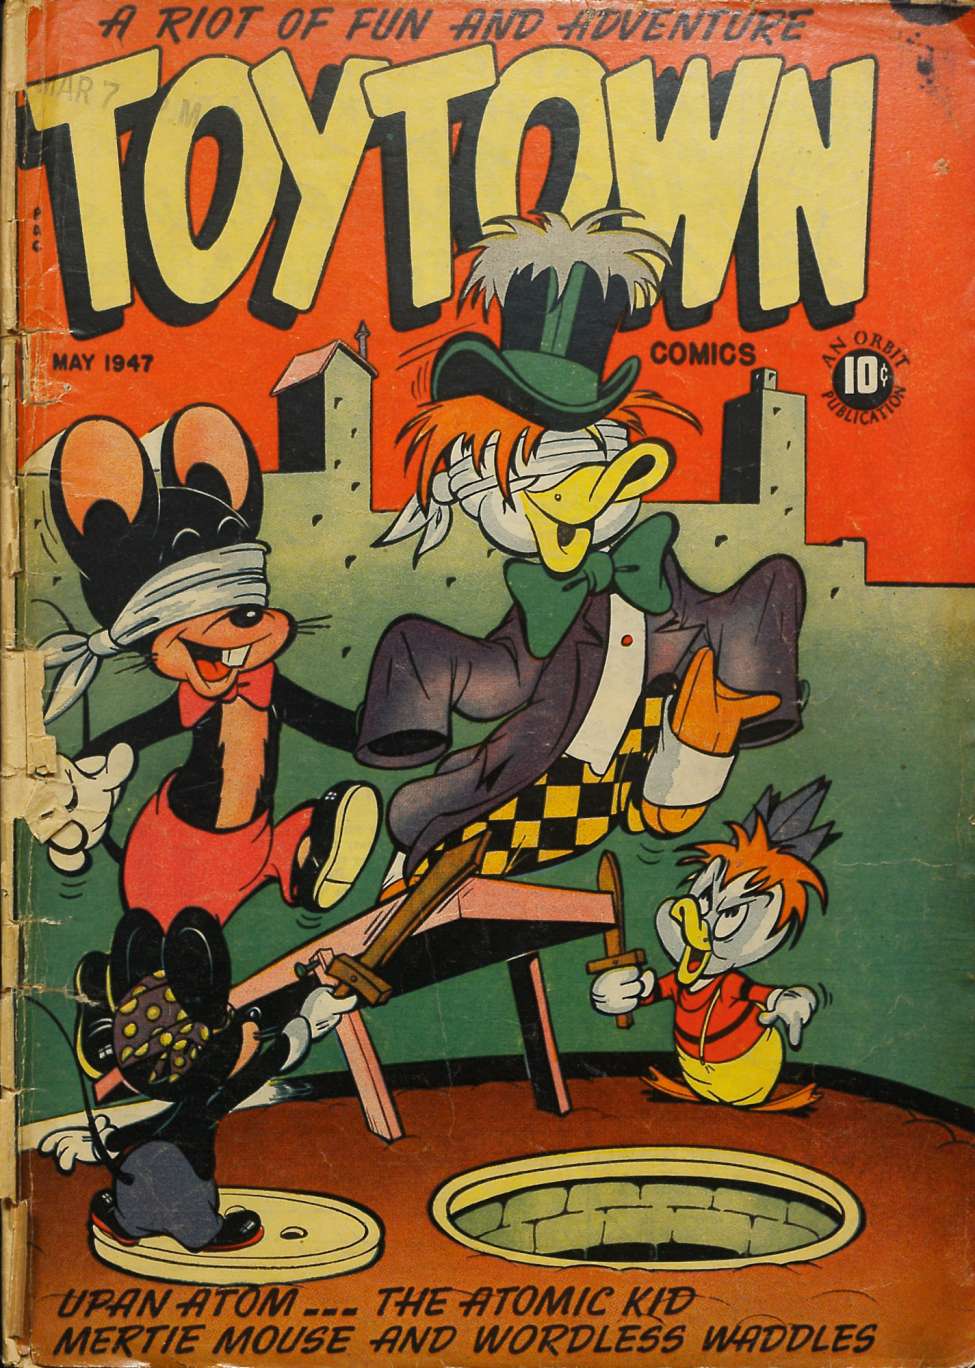 Book Cover For Toytown Comics 7